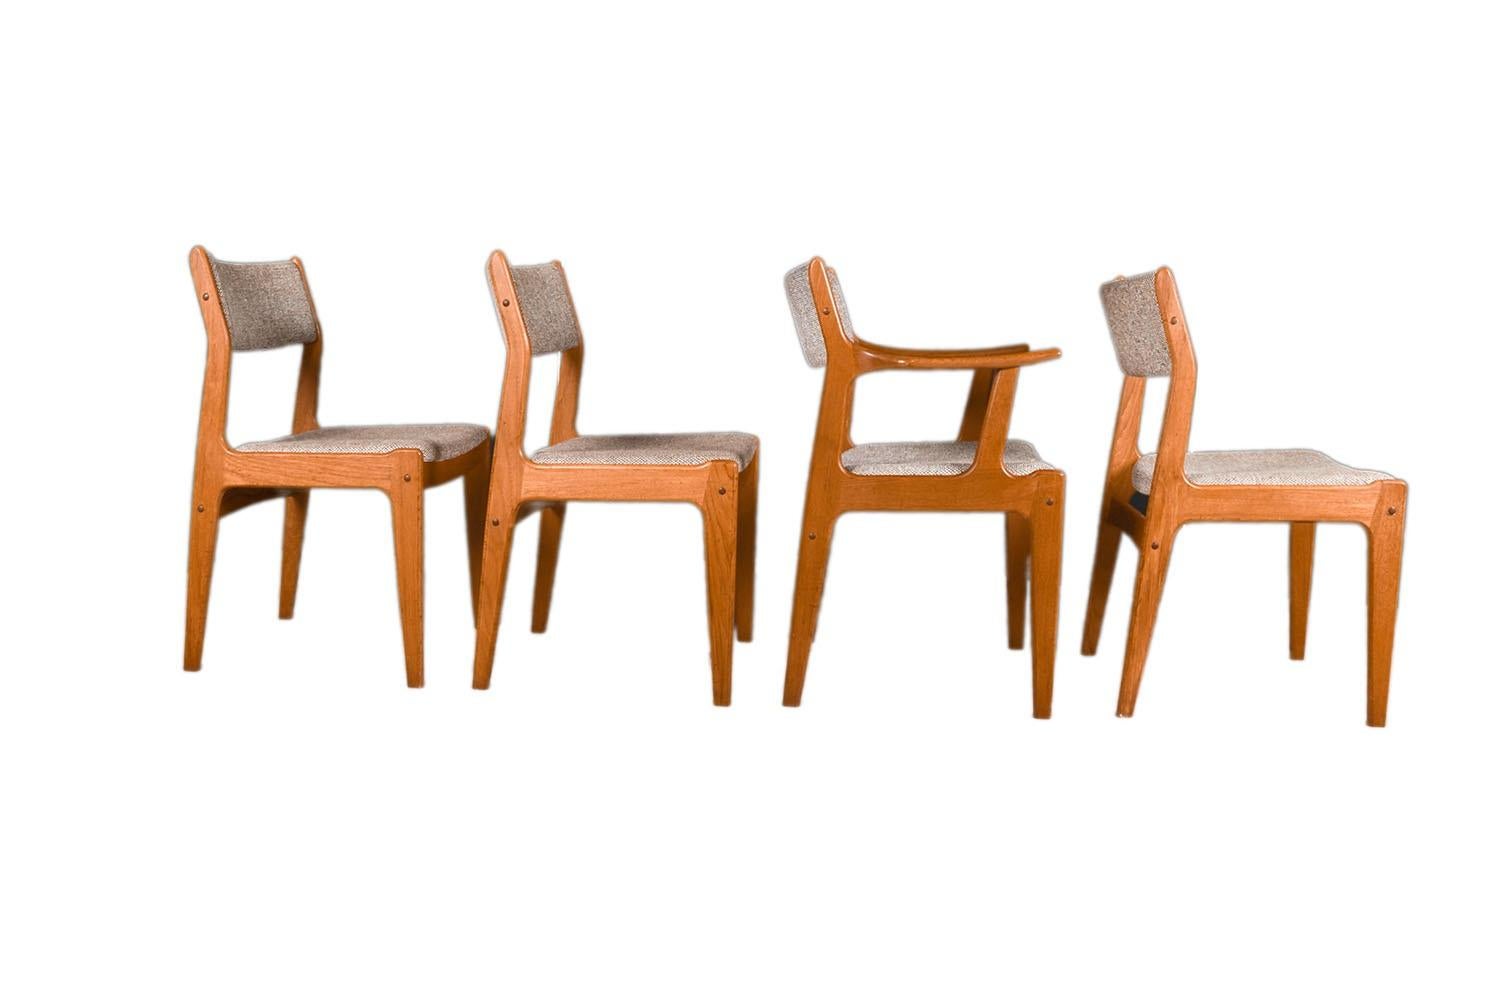 Mid-20th Century Midcentury Scandinavia Woodworks Co Teak Dining Chairs For Sale